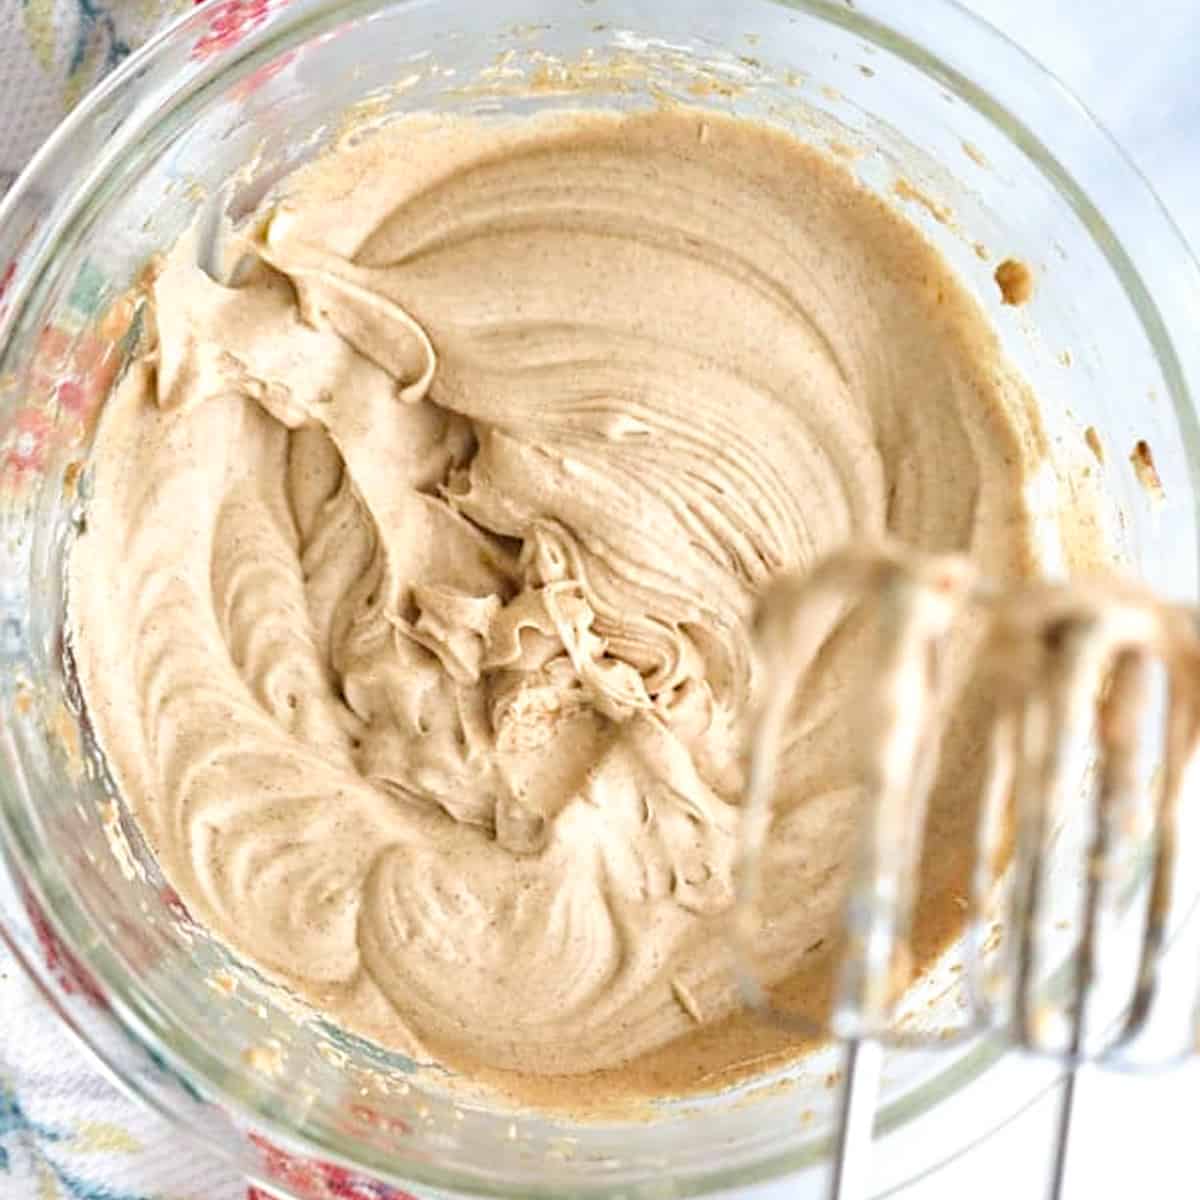 Homemade whipped cinnamon honey butter with an electric hand mixer